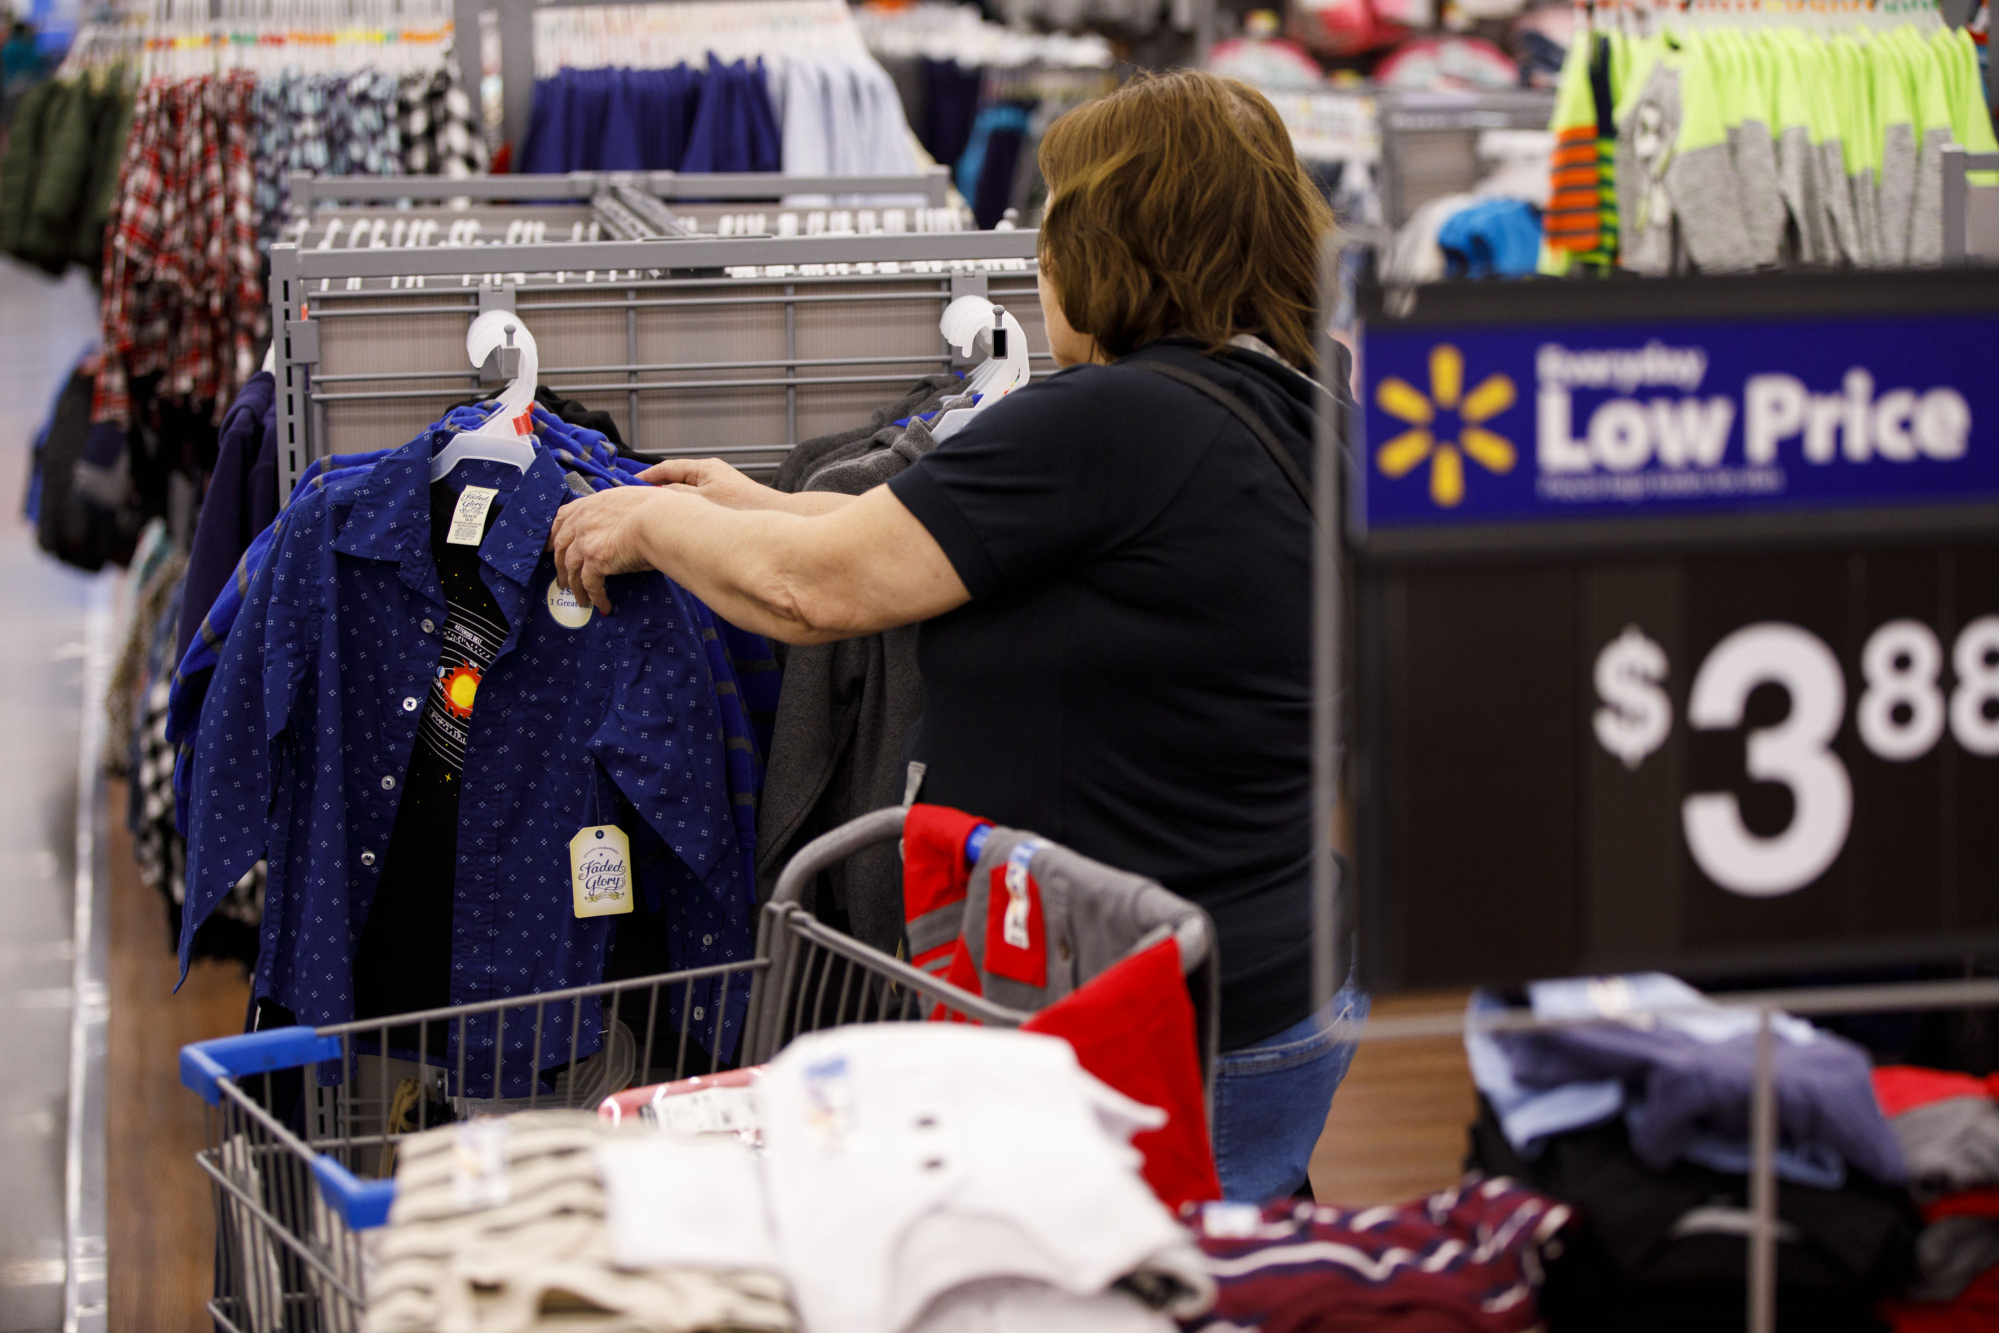 Walmart Looks at Innovative Carbon Capture to Turn CO2 Into Clothes